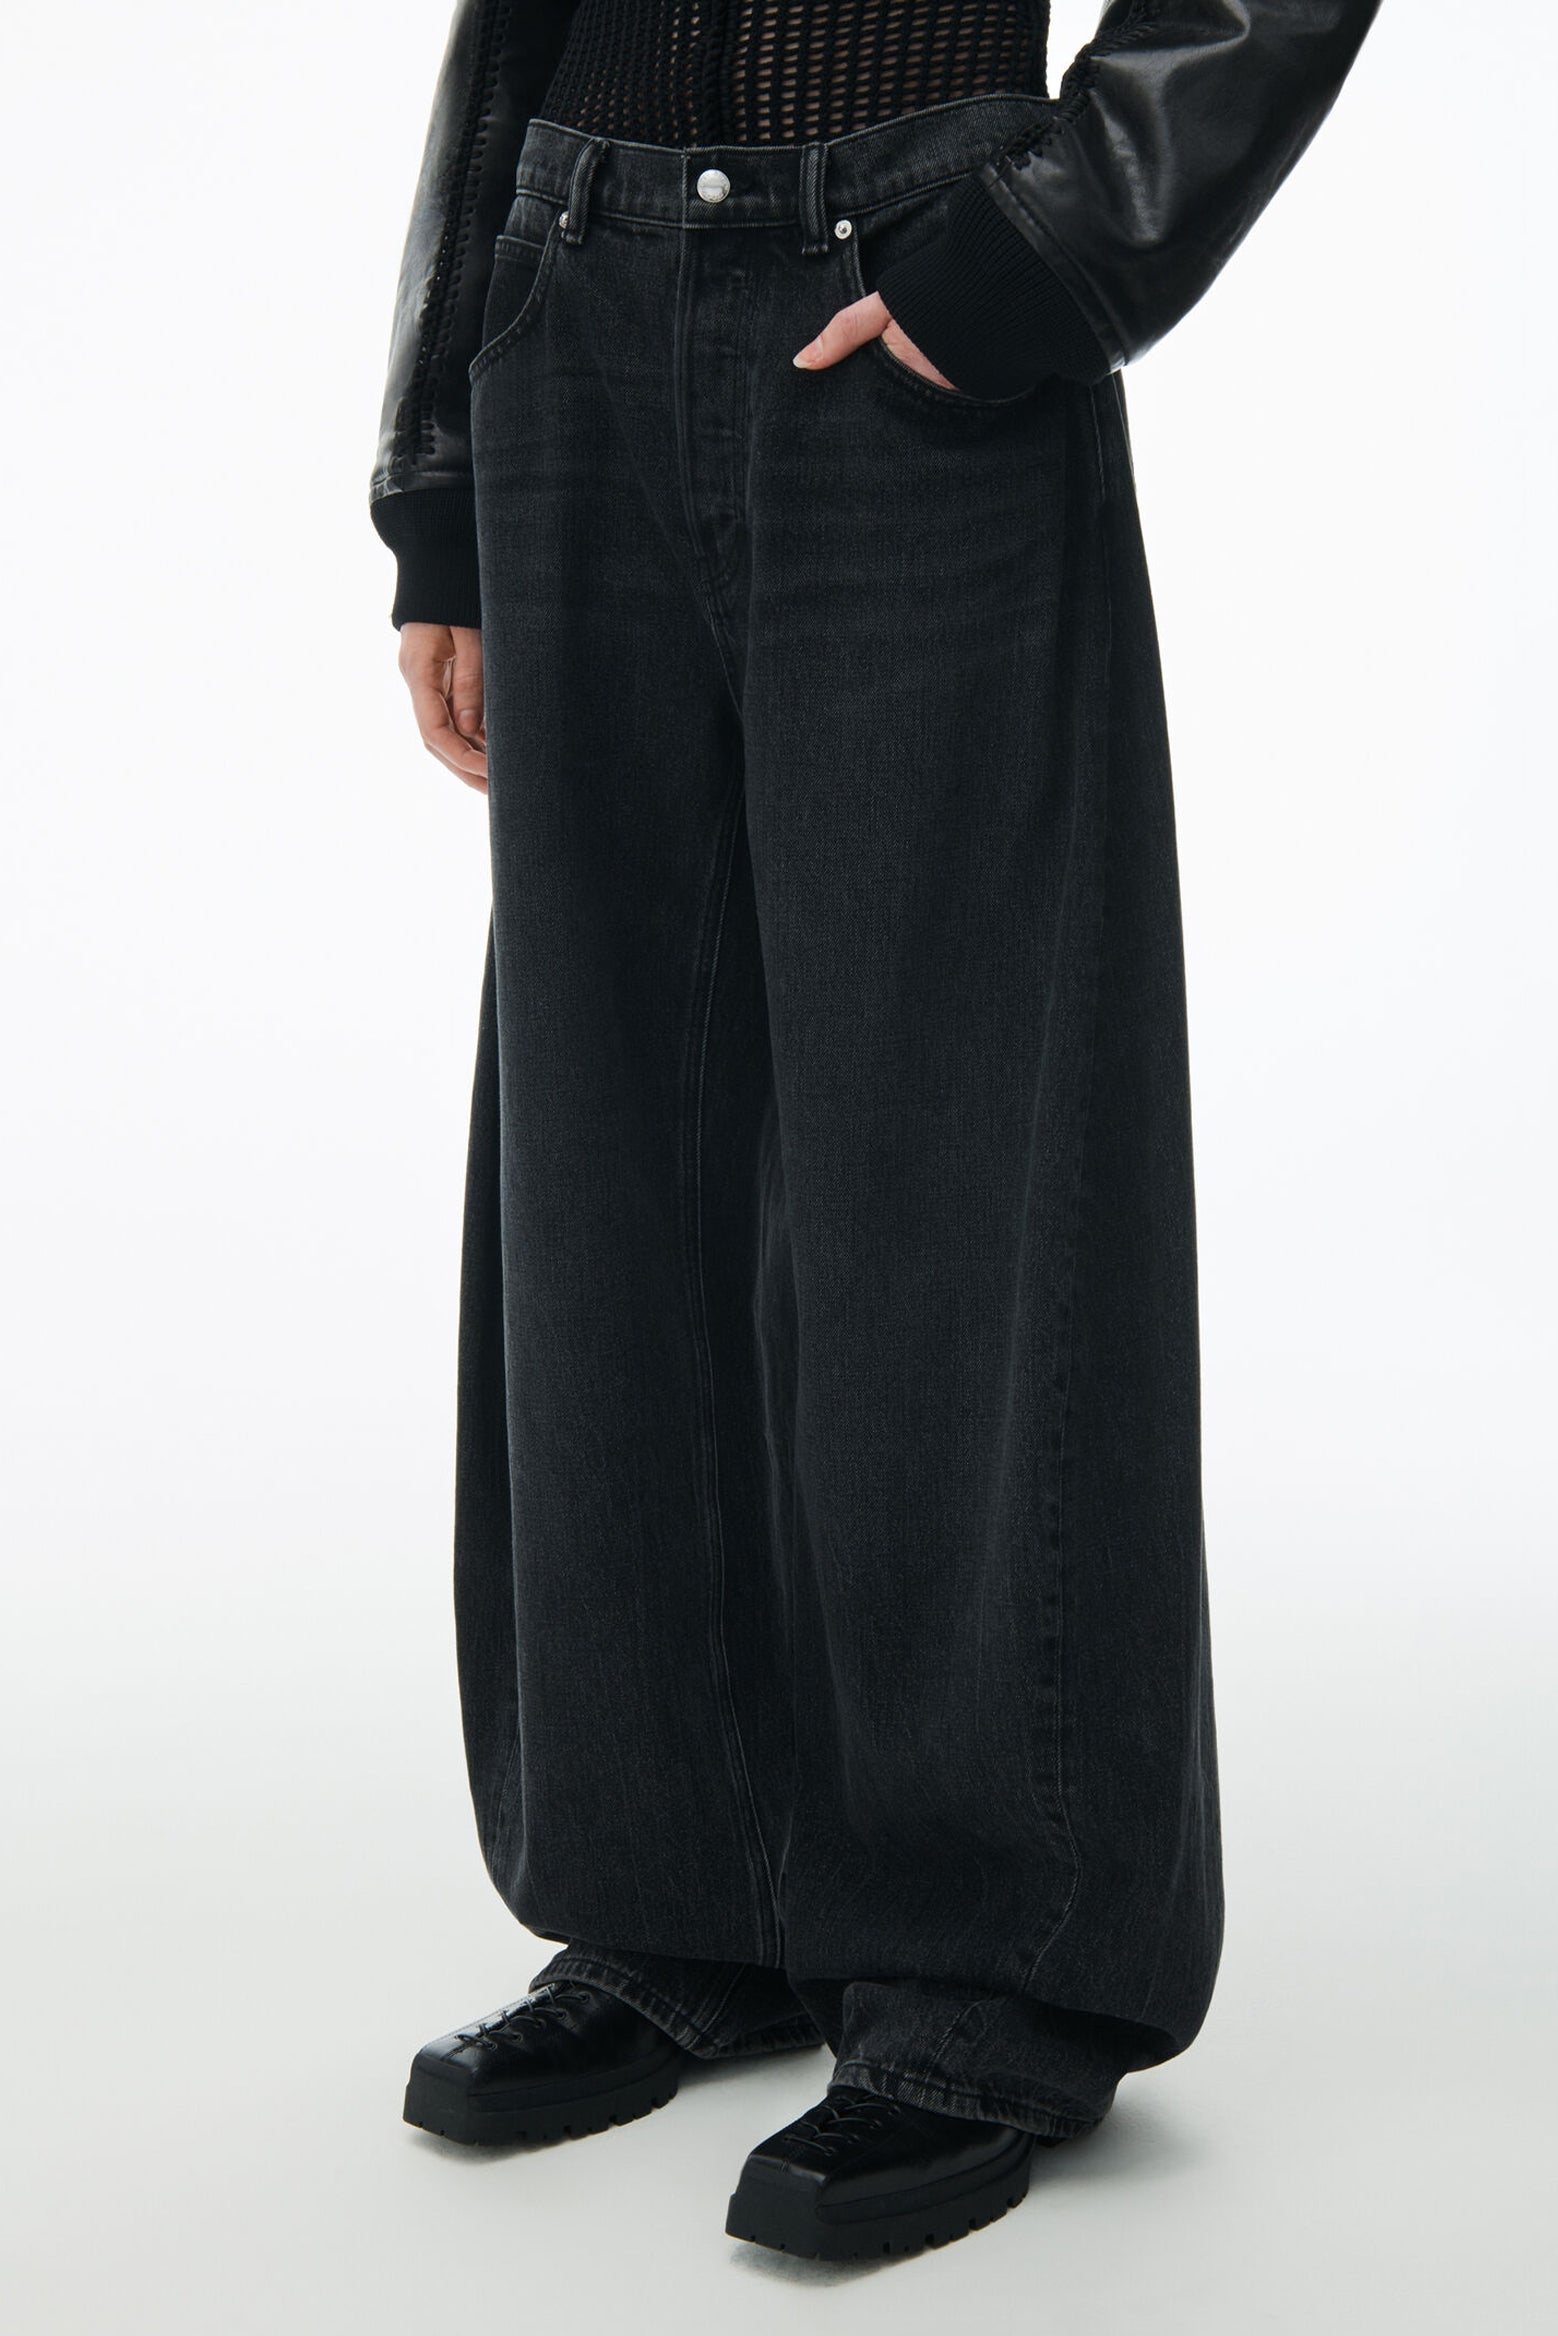 The Alexander Wang Oversized Rounded Low Rise Jean in Grey Aged available at The New Trend Australia